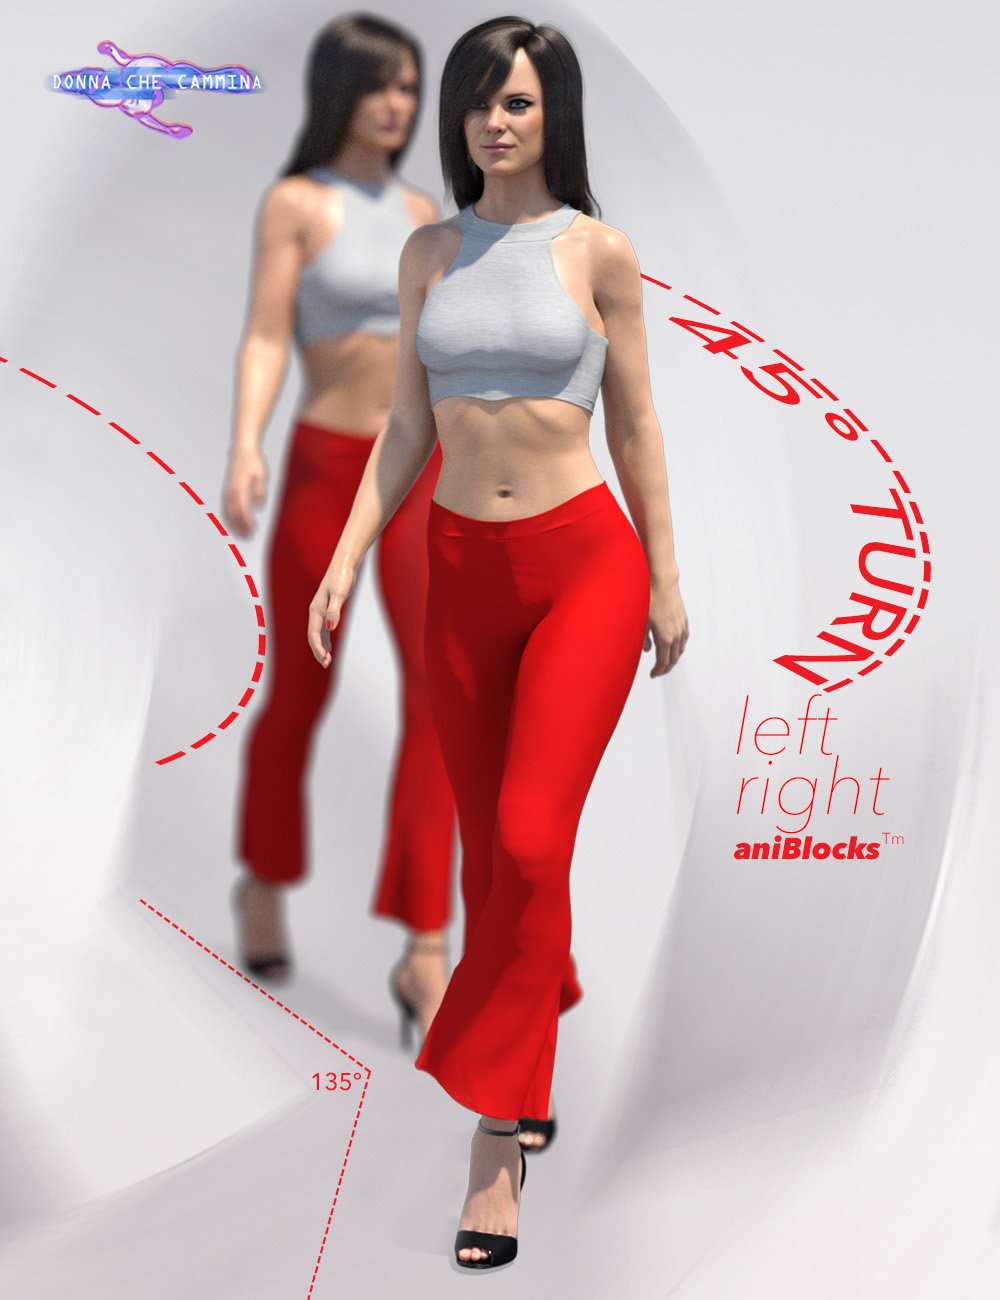 Quick Turn Walk Cycle Add On for Genesis 8 Female(s) by: Donna che cammina, 3D Models by Daz 3D